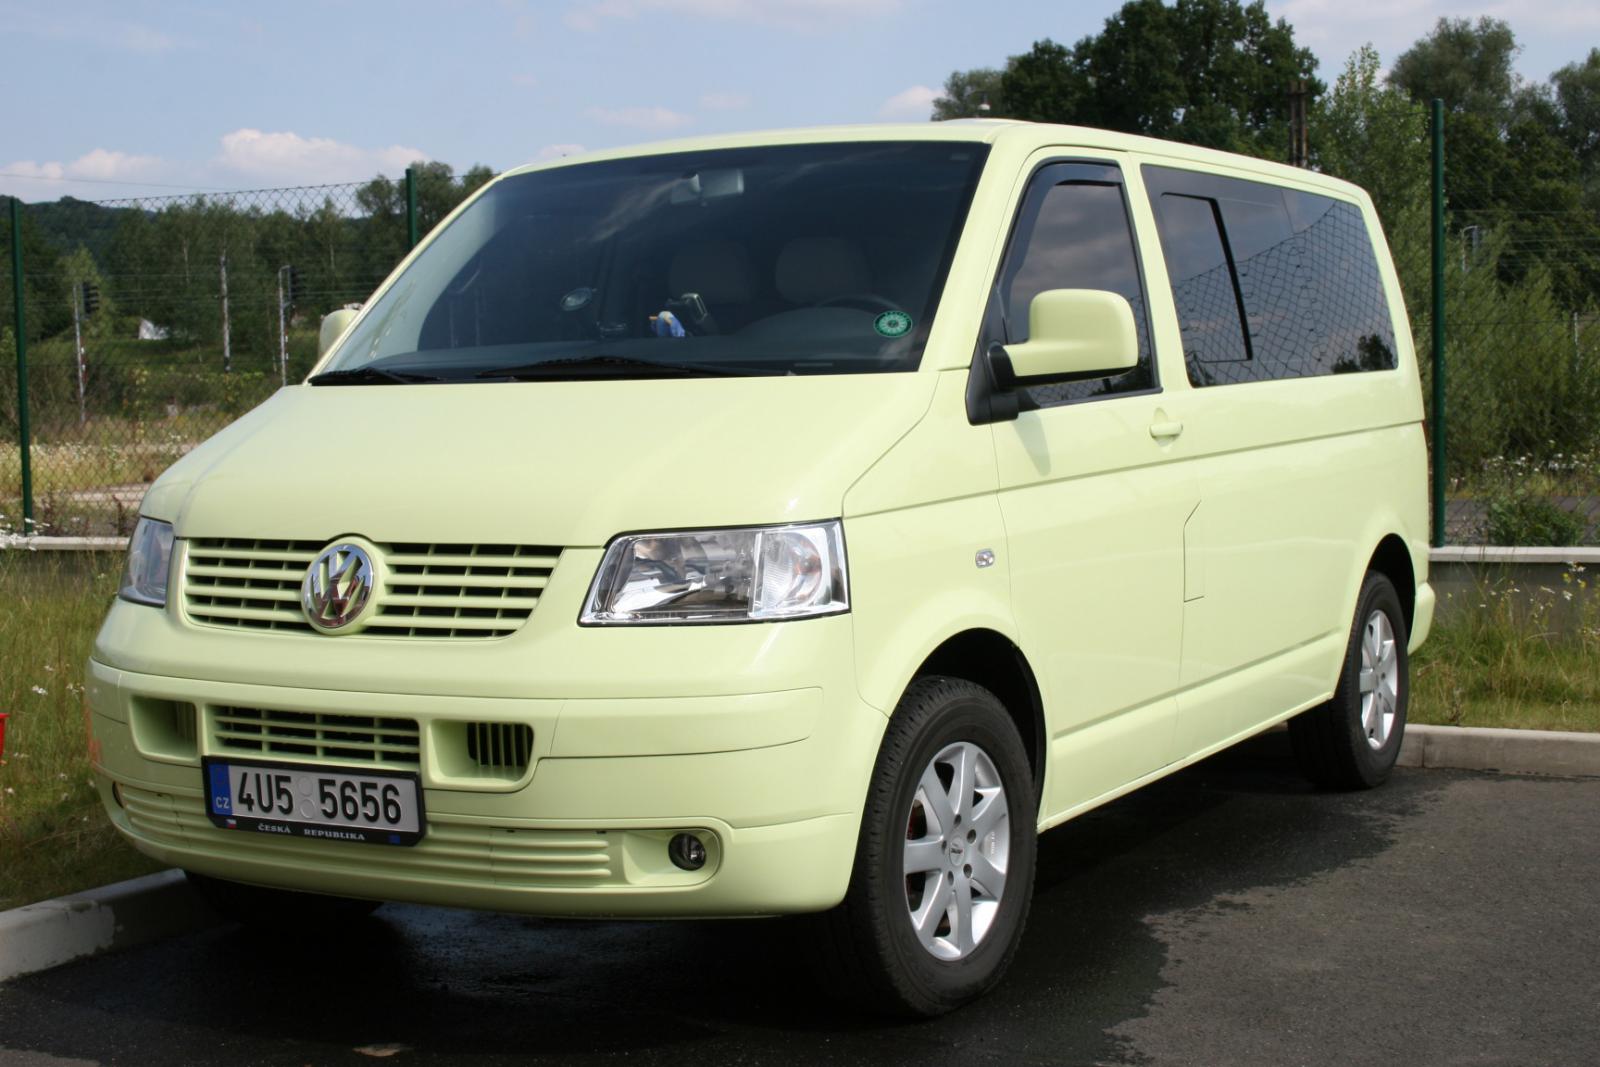 Volkswagen Transporter 2003 Review, Amazing Pictures and